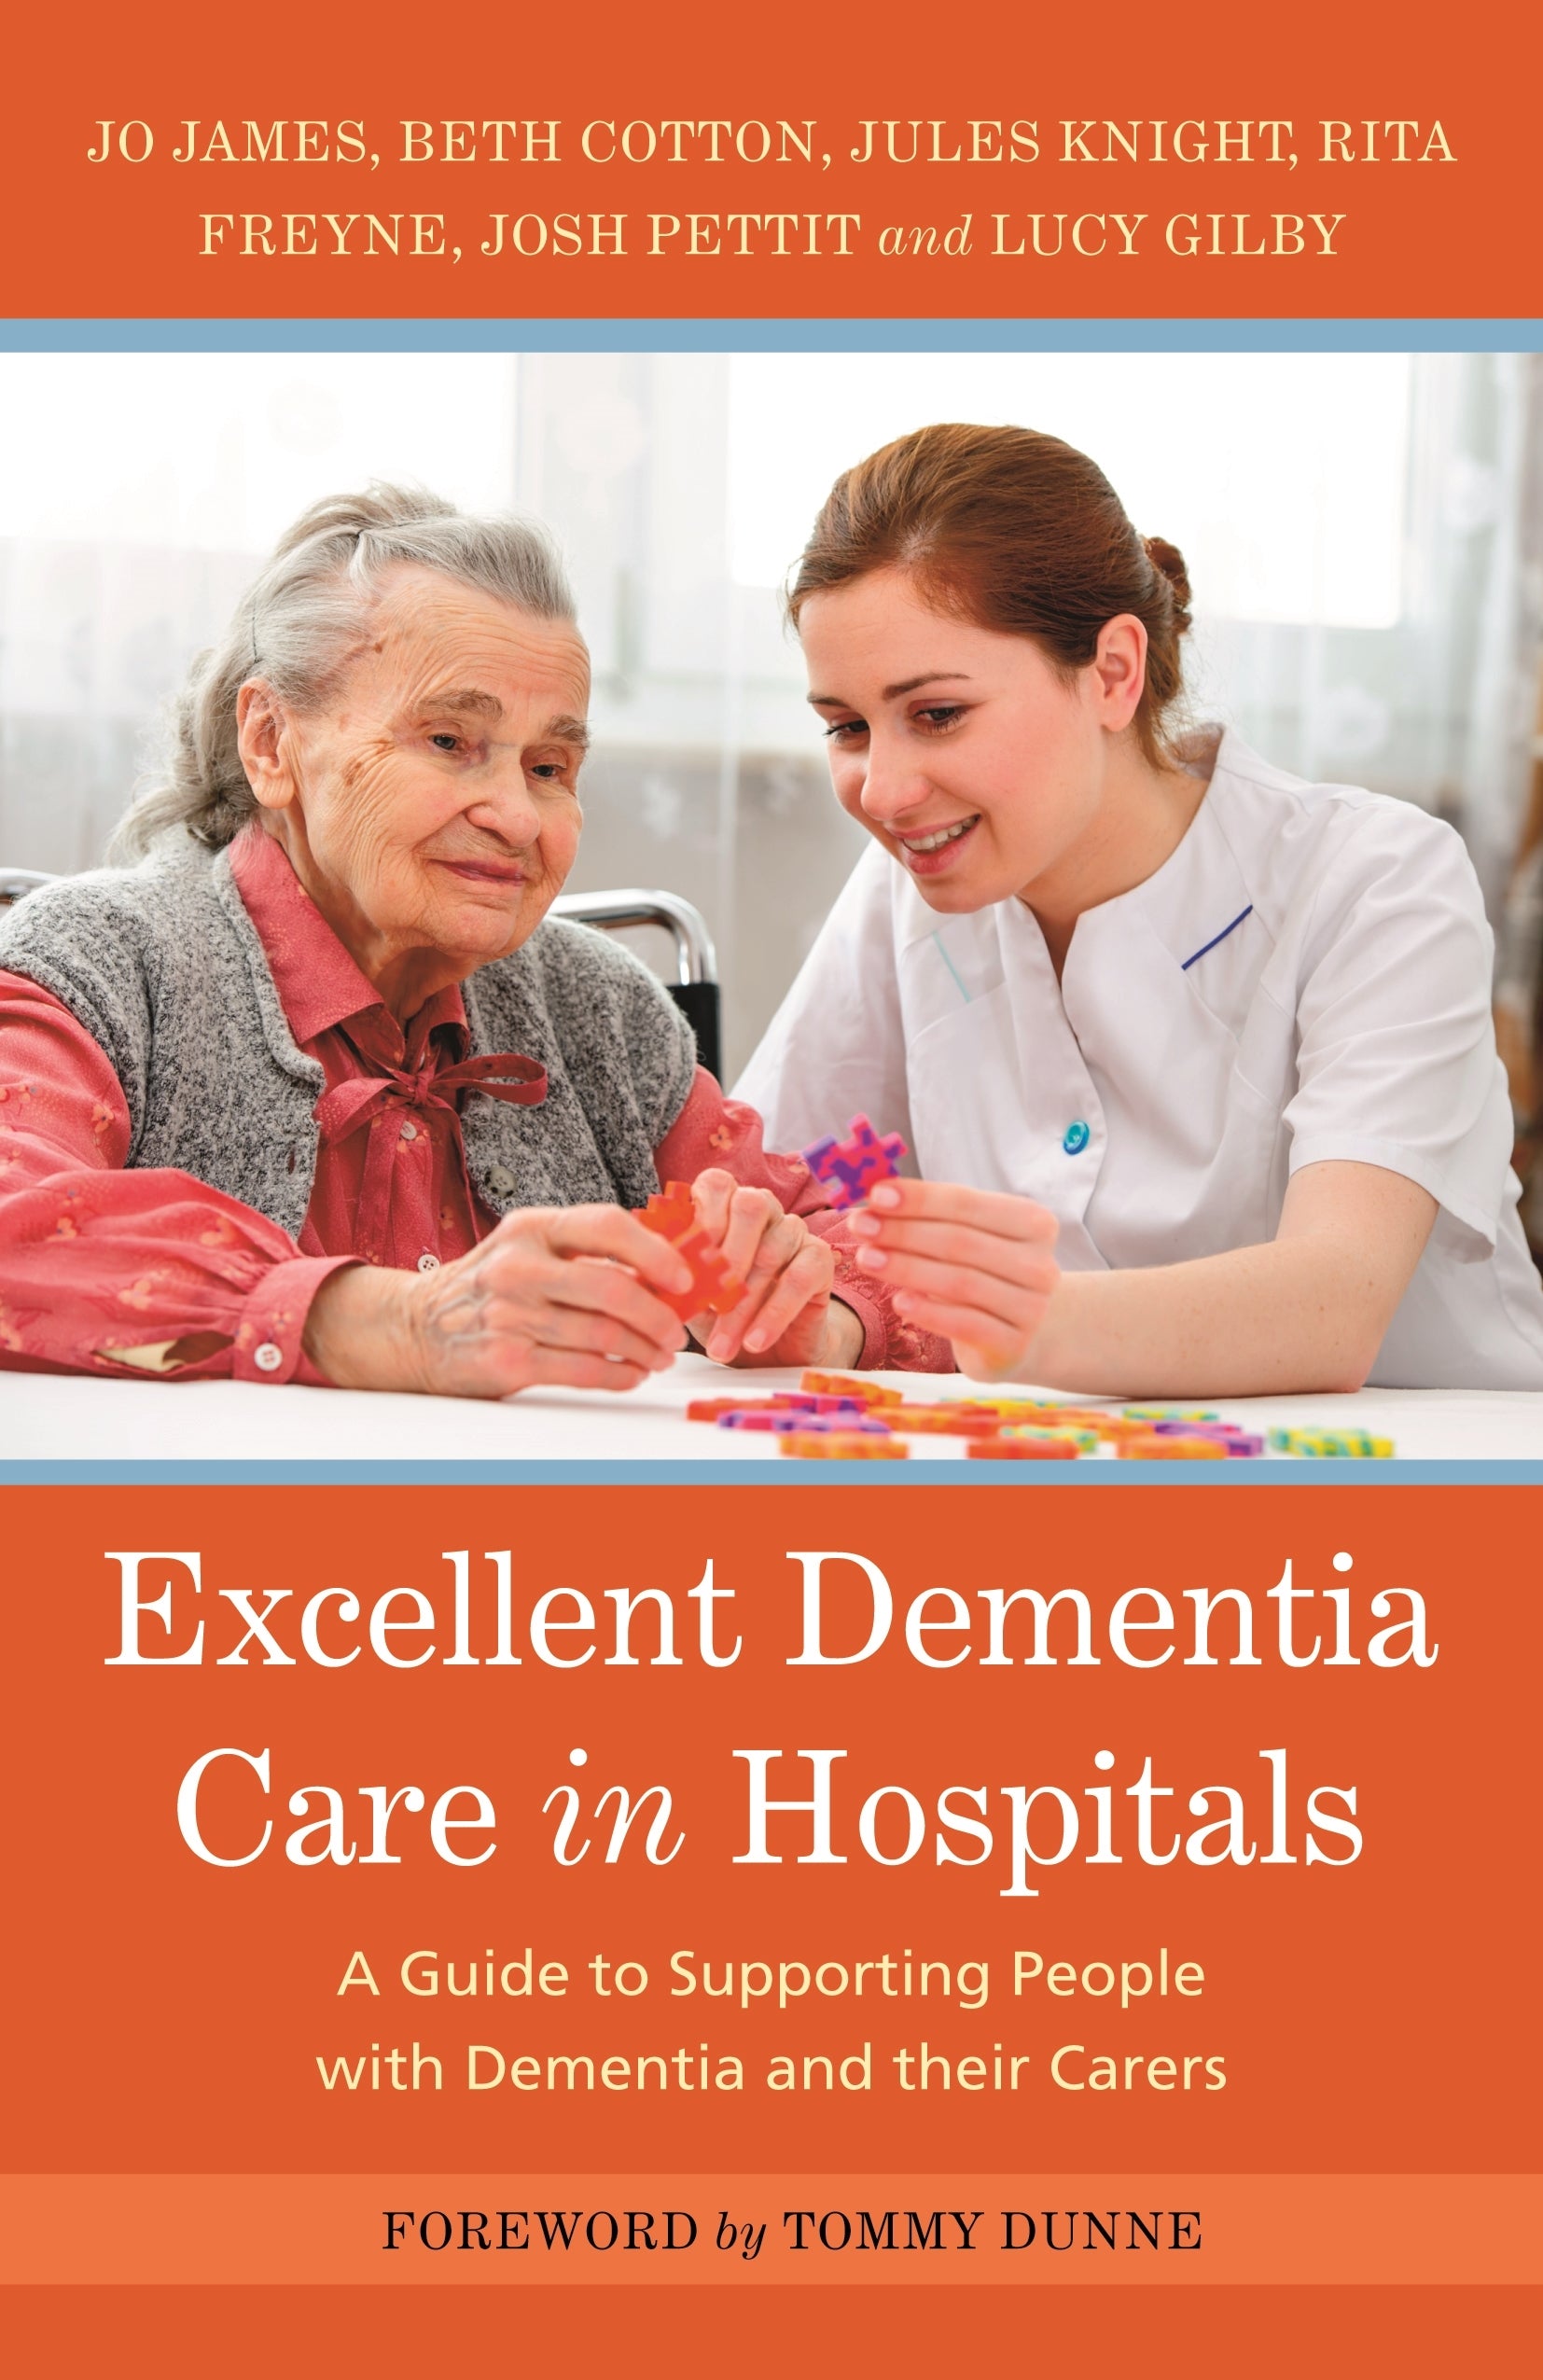 Excellent Dementia Care in Hospitals by Jo James, Jules Knight, Bethany Cotton, Rita Freyne, Josh Pettit, Lucy Gilby, Tommy Dunne